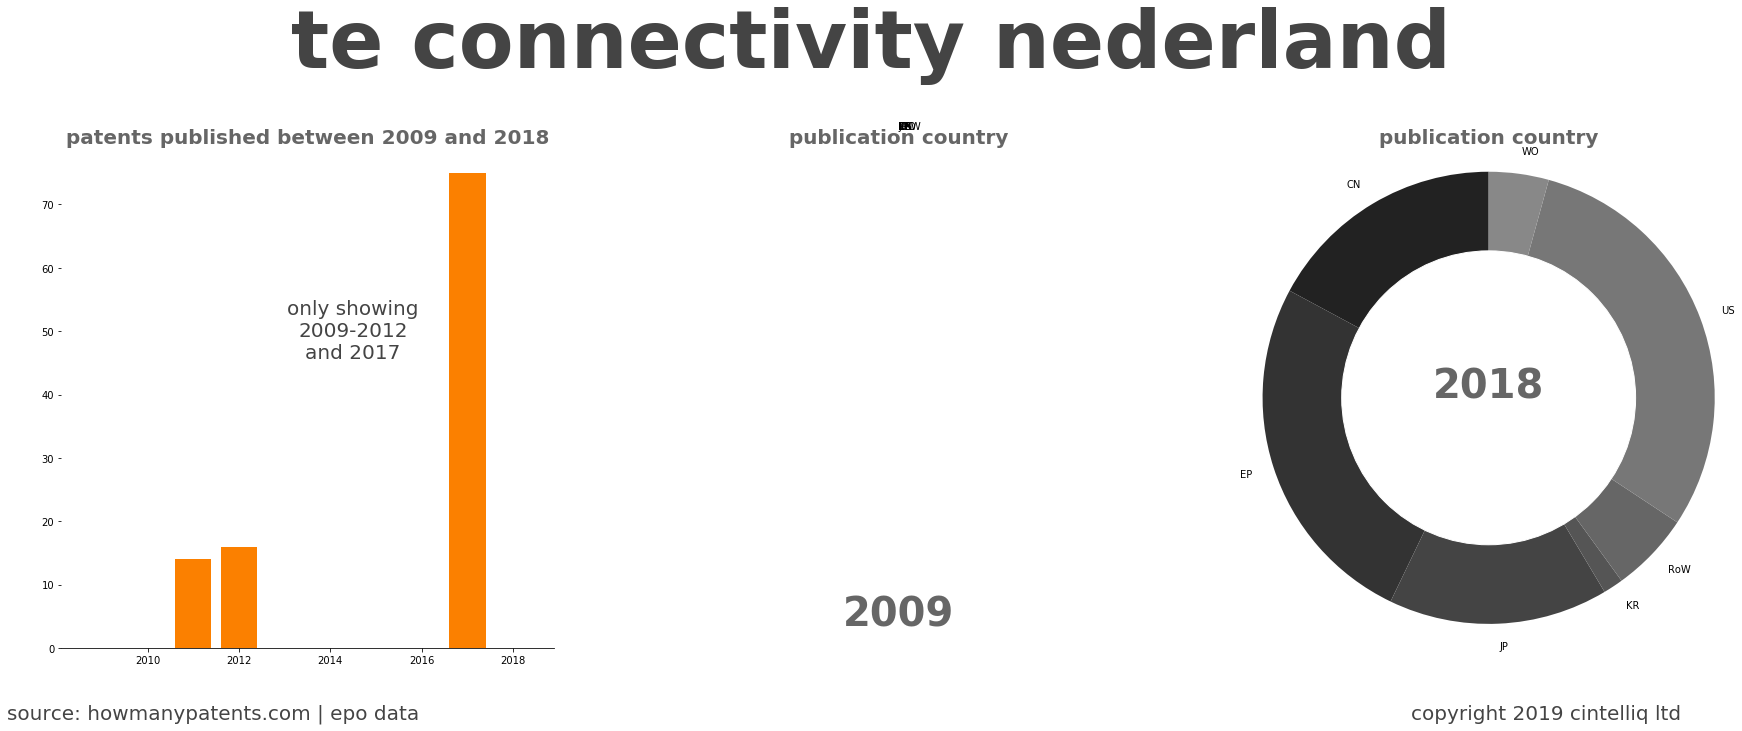 summary of patents for Te Connectivity Nederland